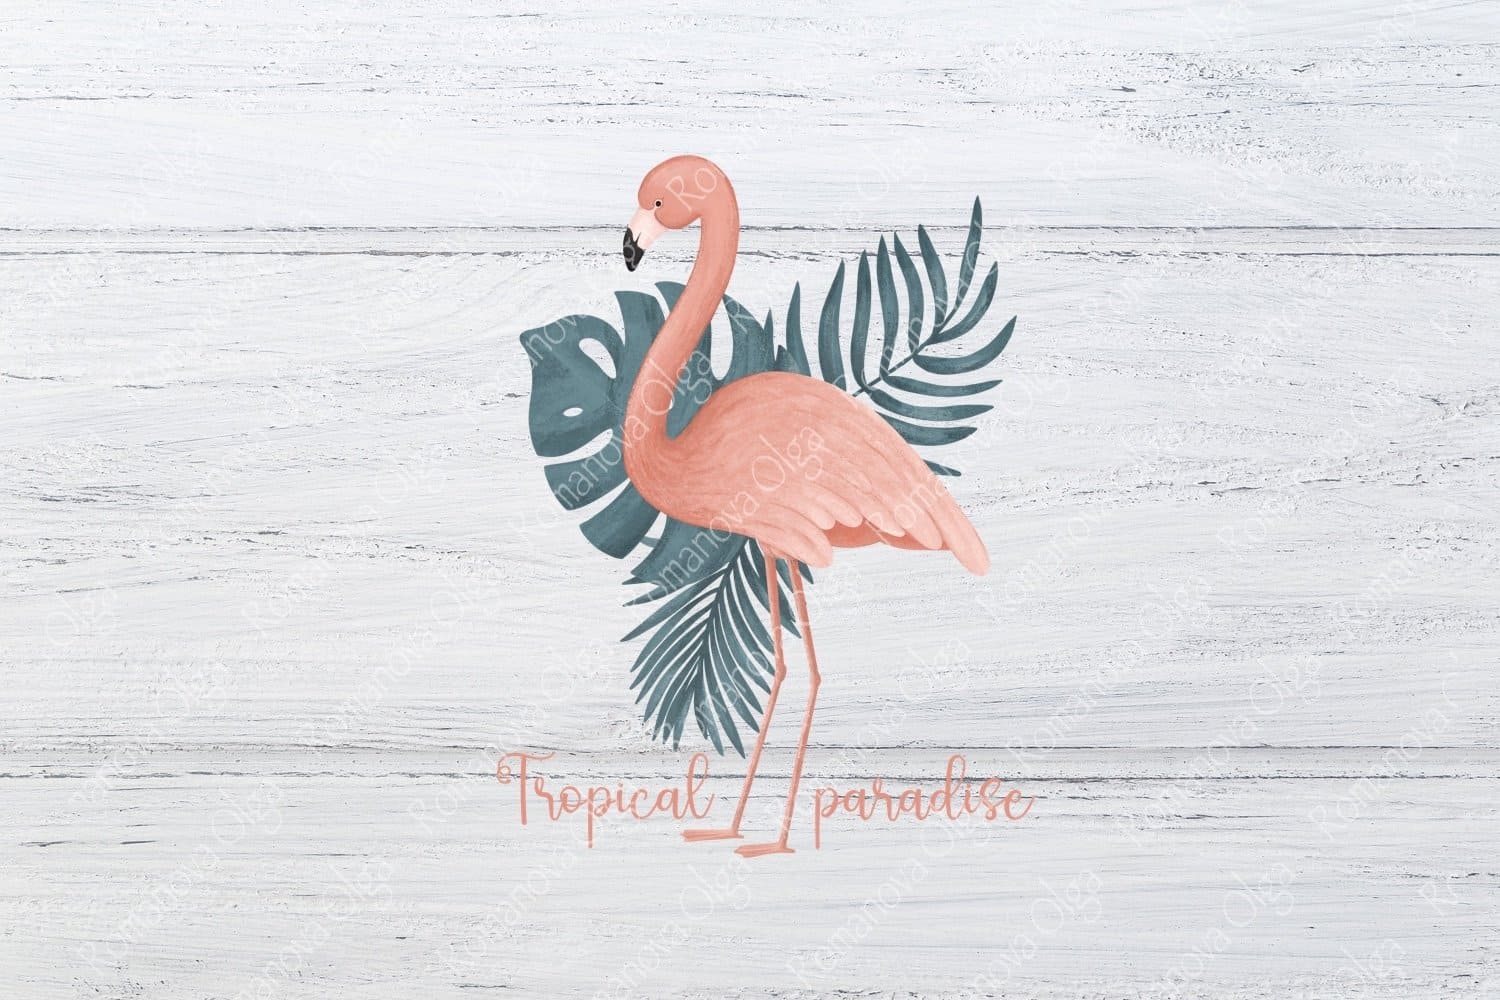 A tropical paradise featuring a pink flamingo.